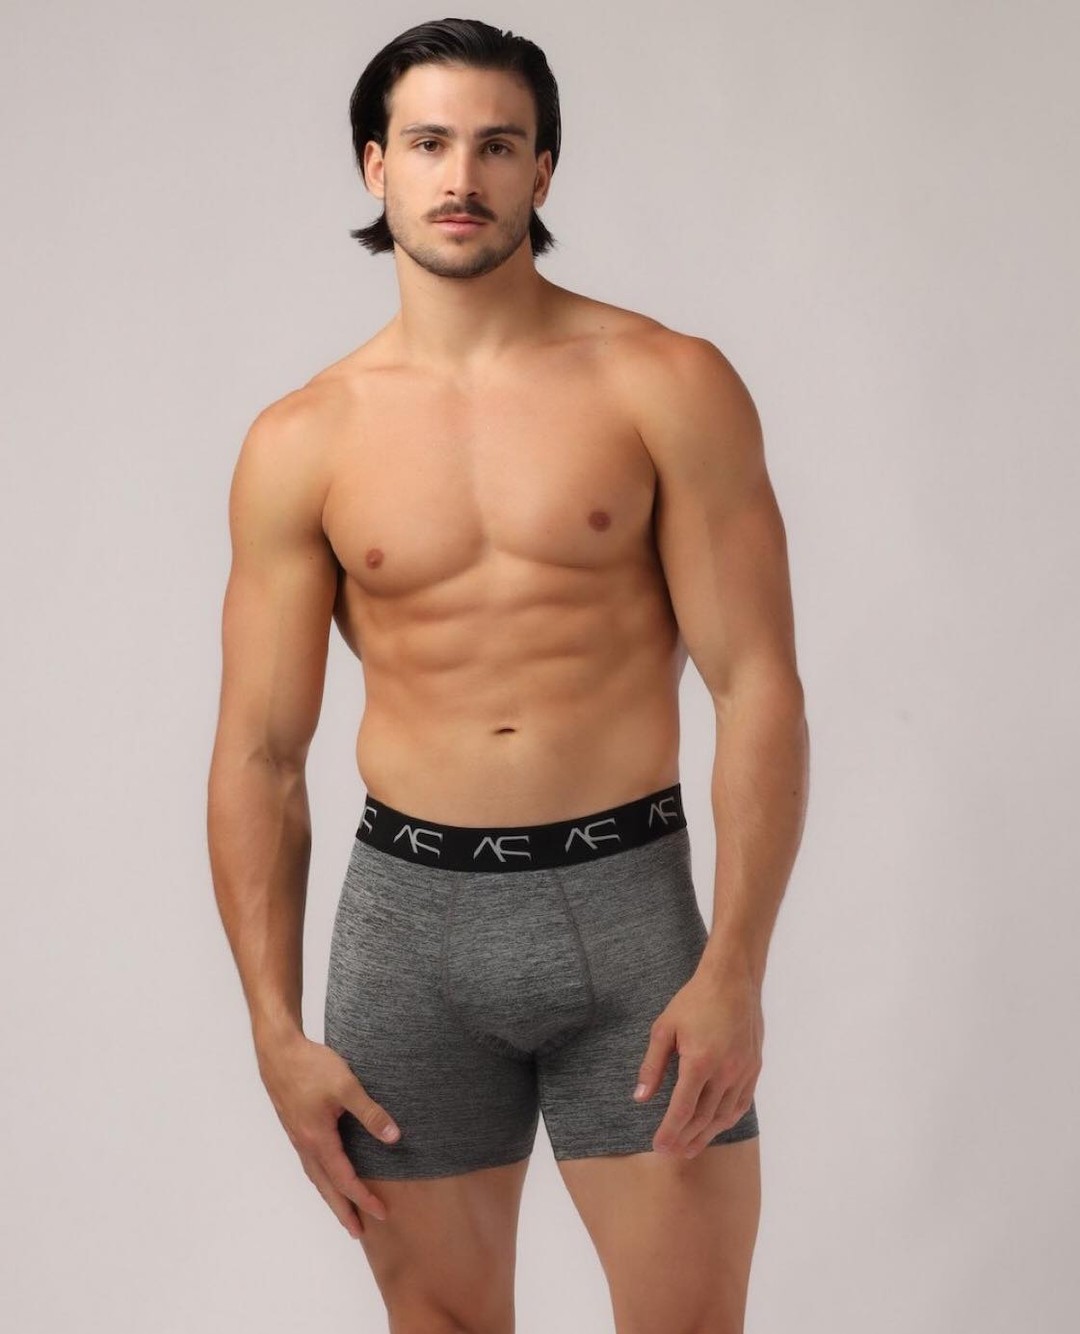 Our underwear suggestion today is the Workout Trunks in grey by Adam Smith. Would you wear it?
_____
https://www.menandunderwear.com/2022/05/underwear-suggestion-adam-smith-workout-trunks-grey.html